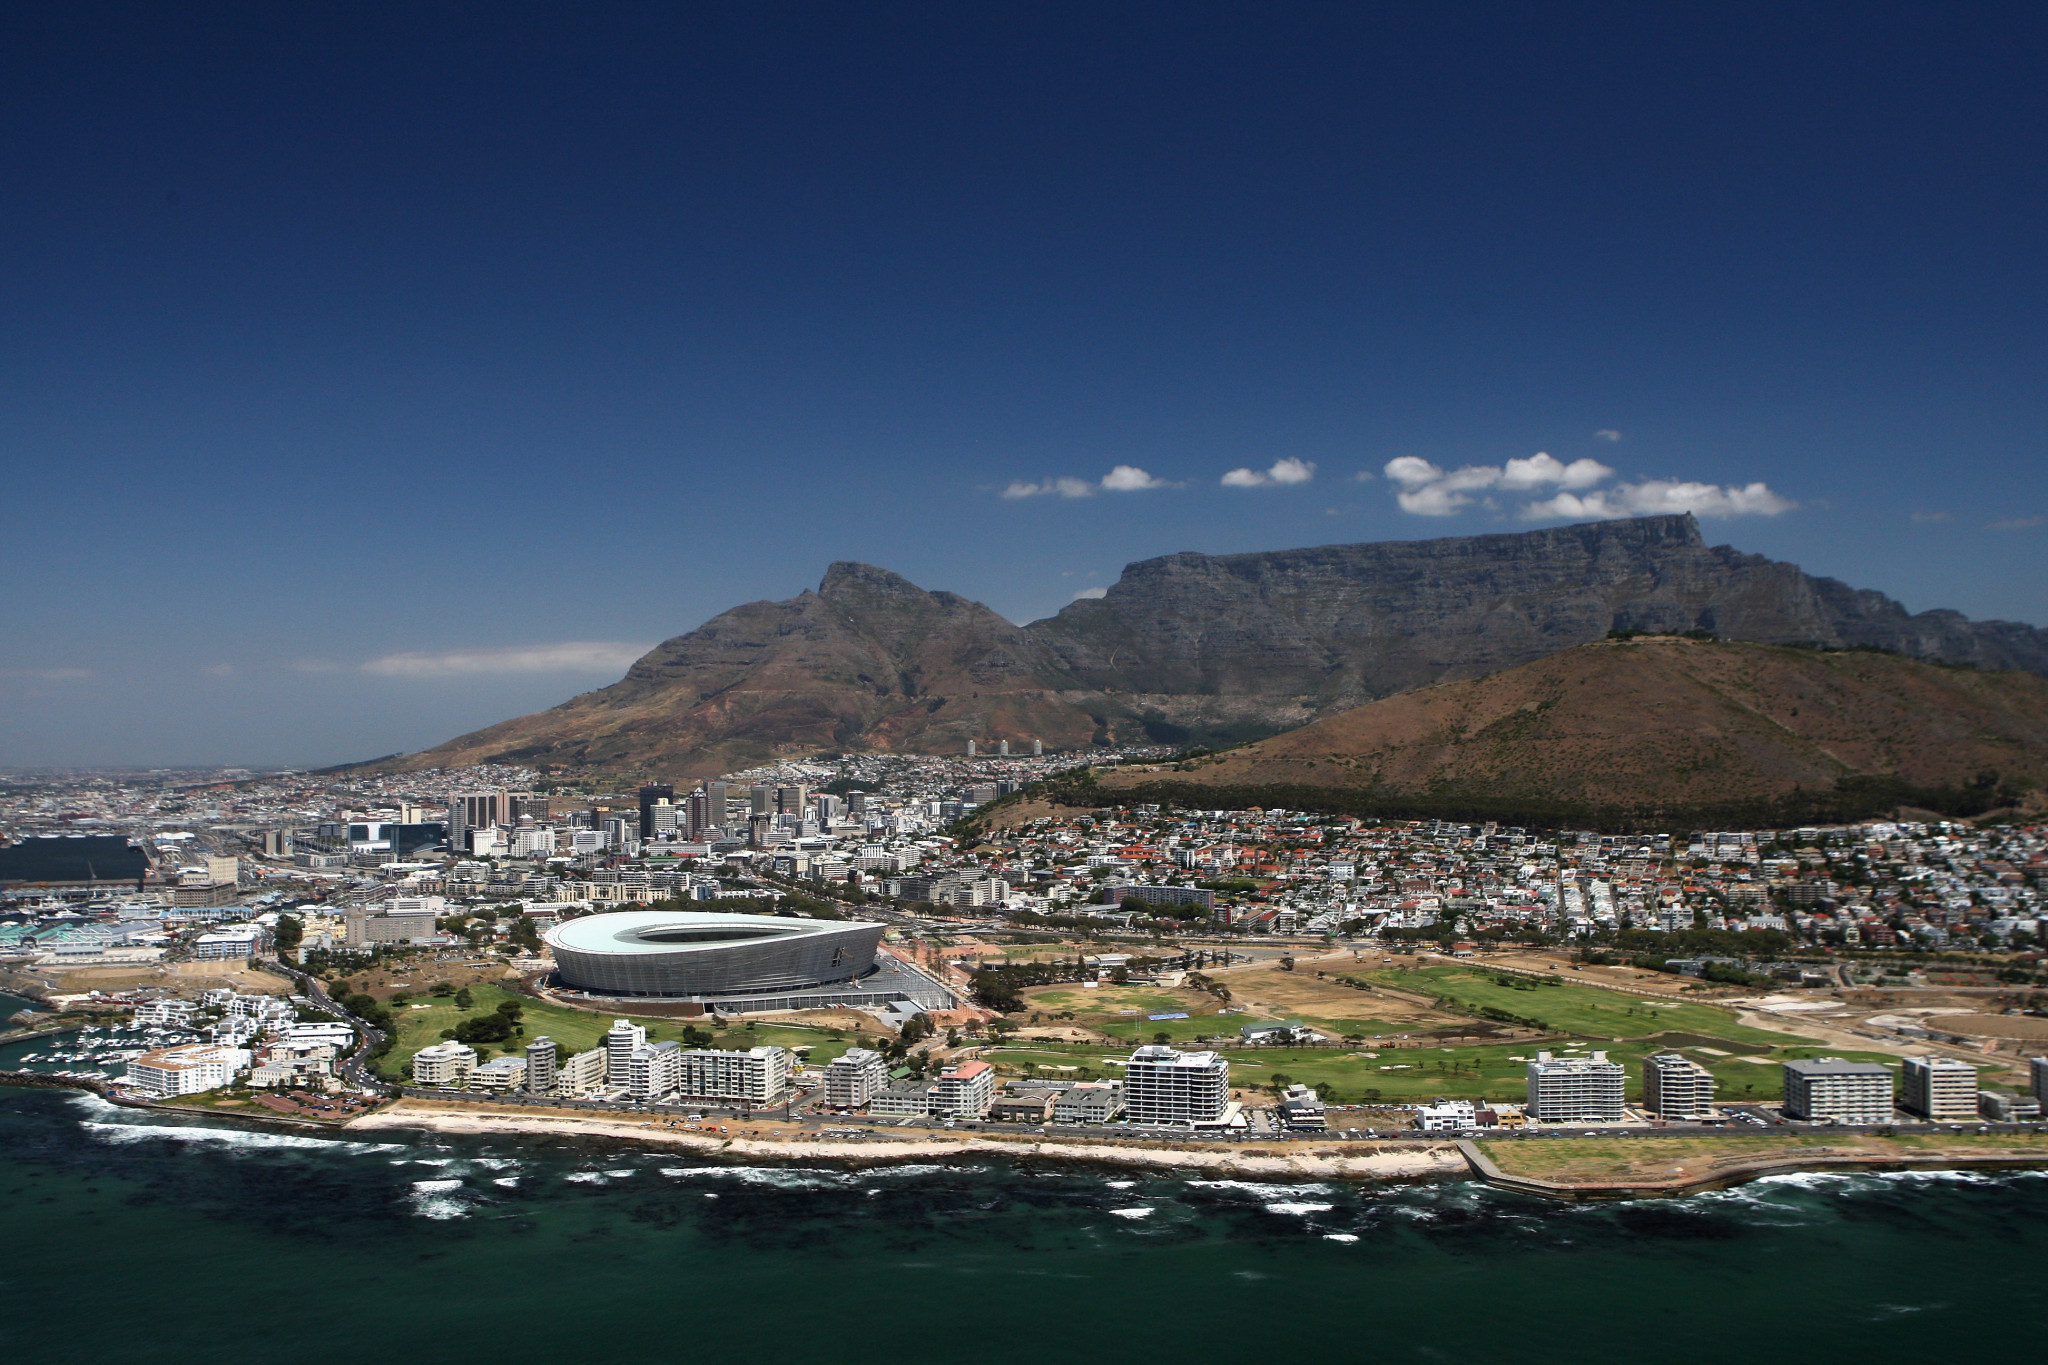 Liz Nicholl argued that the 2023 Netball World Cup in Cape Town will be 